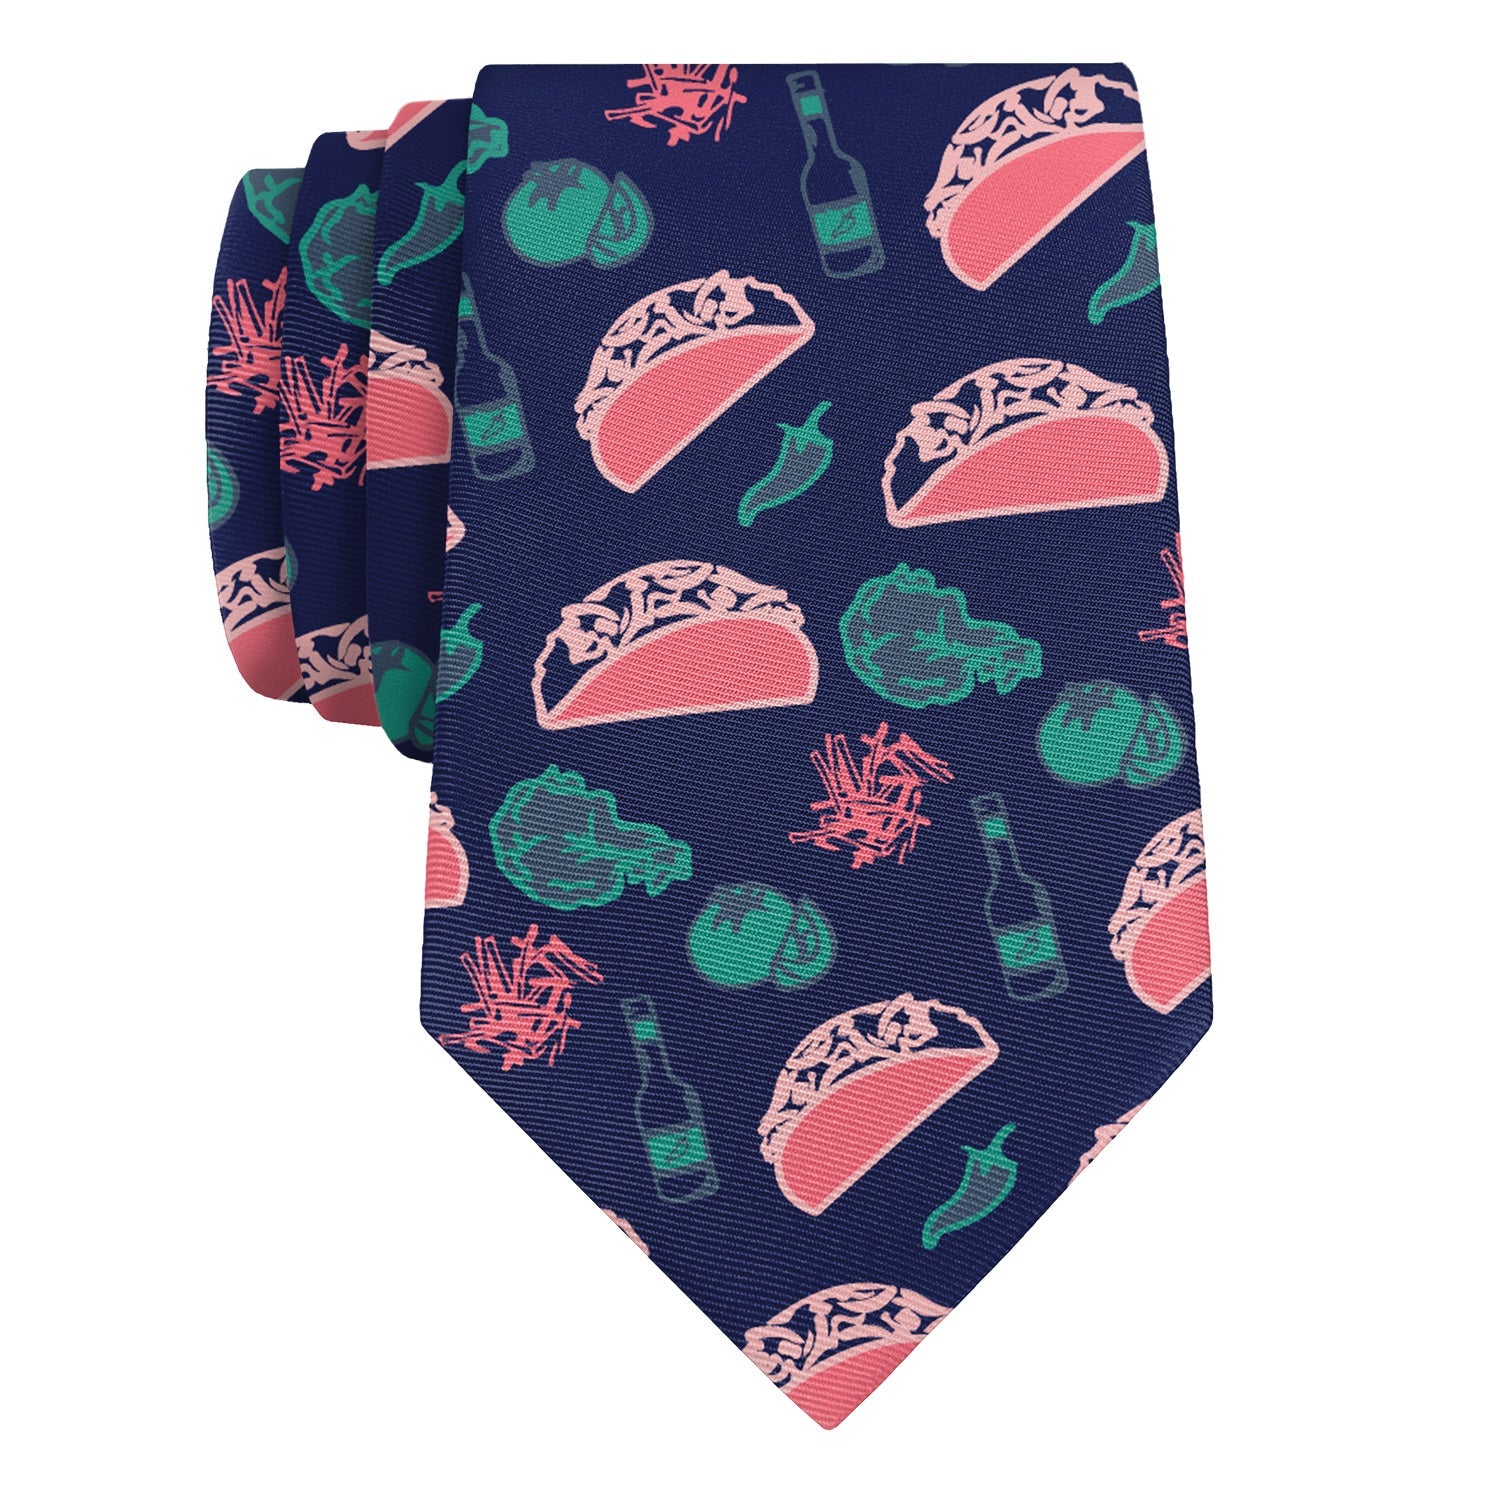 Taco Tuesday Necktie - Rolled - Knotty Tie Co.